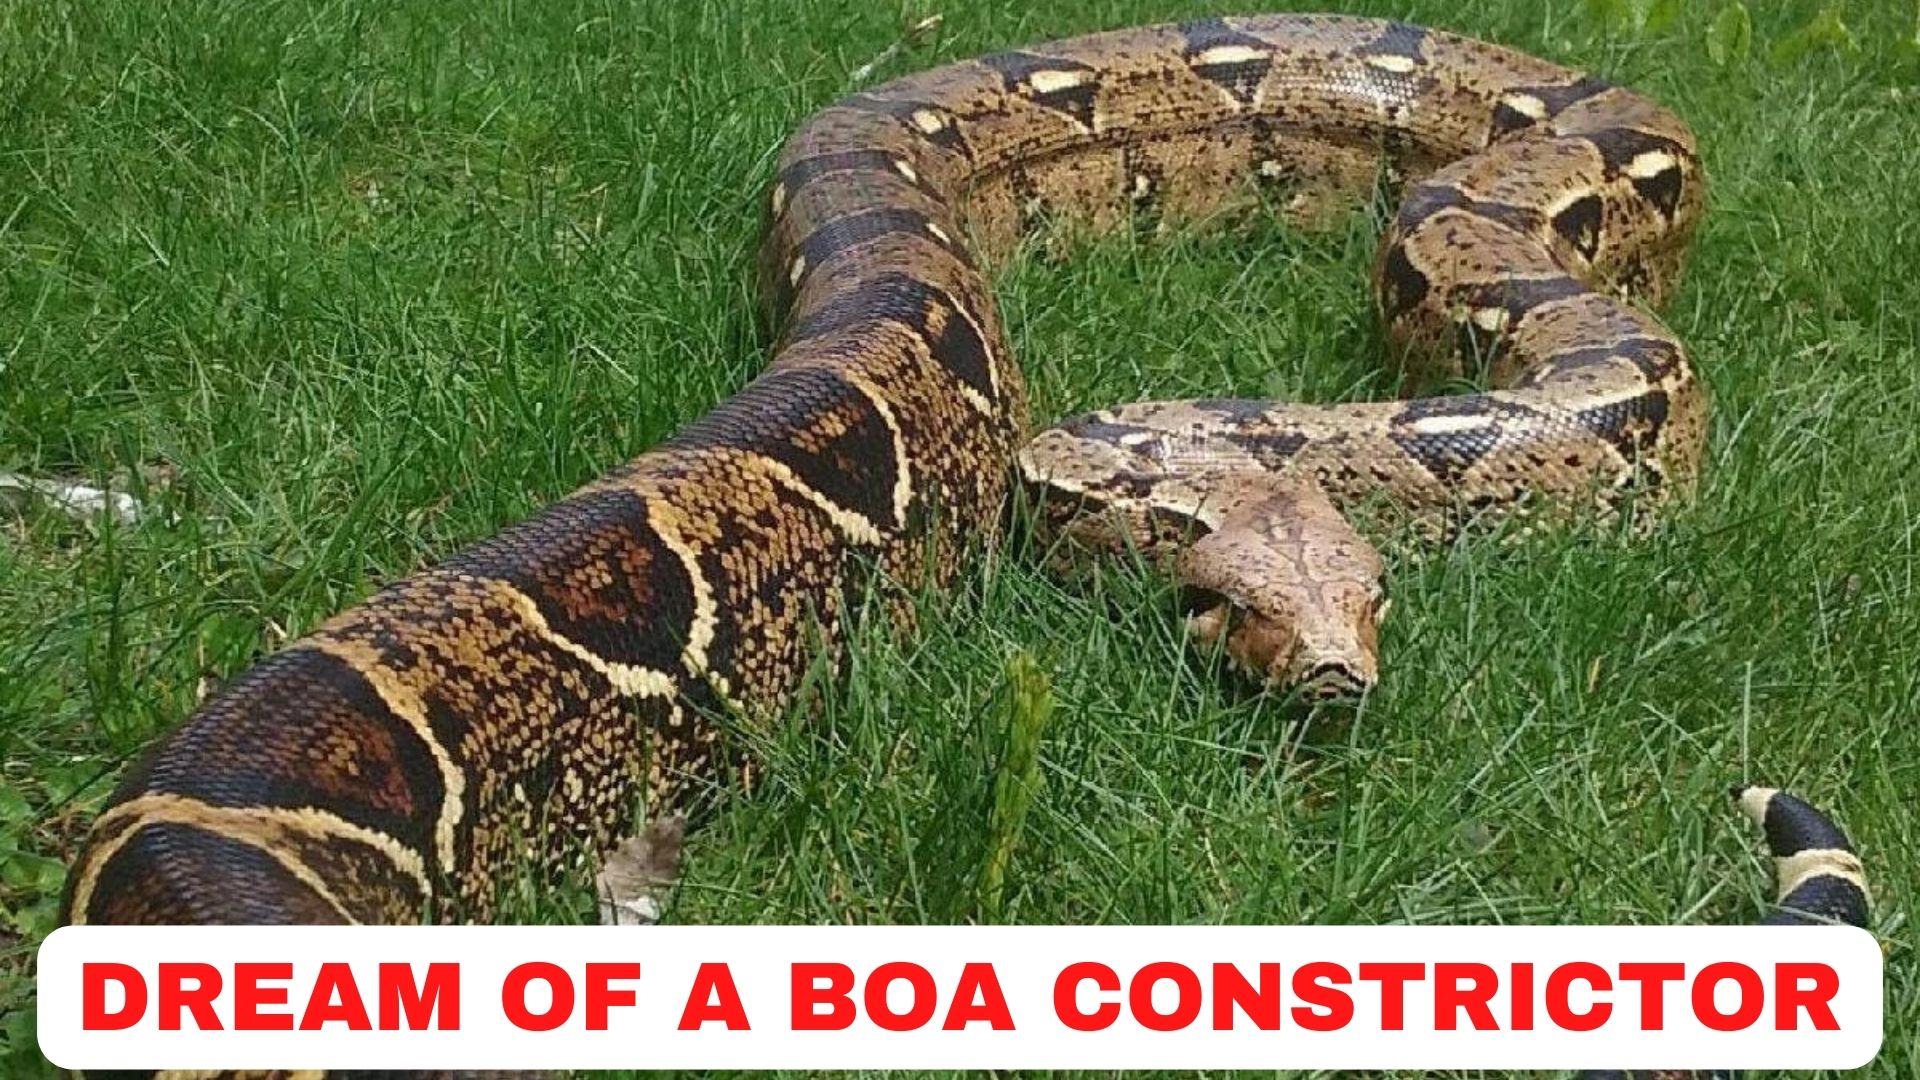 Dream Of A Boa Constrictor - Interpretations & Meanings